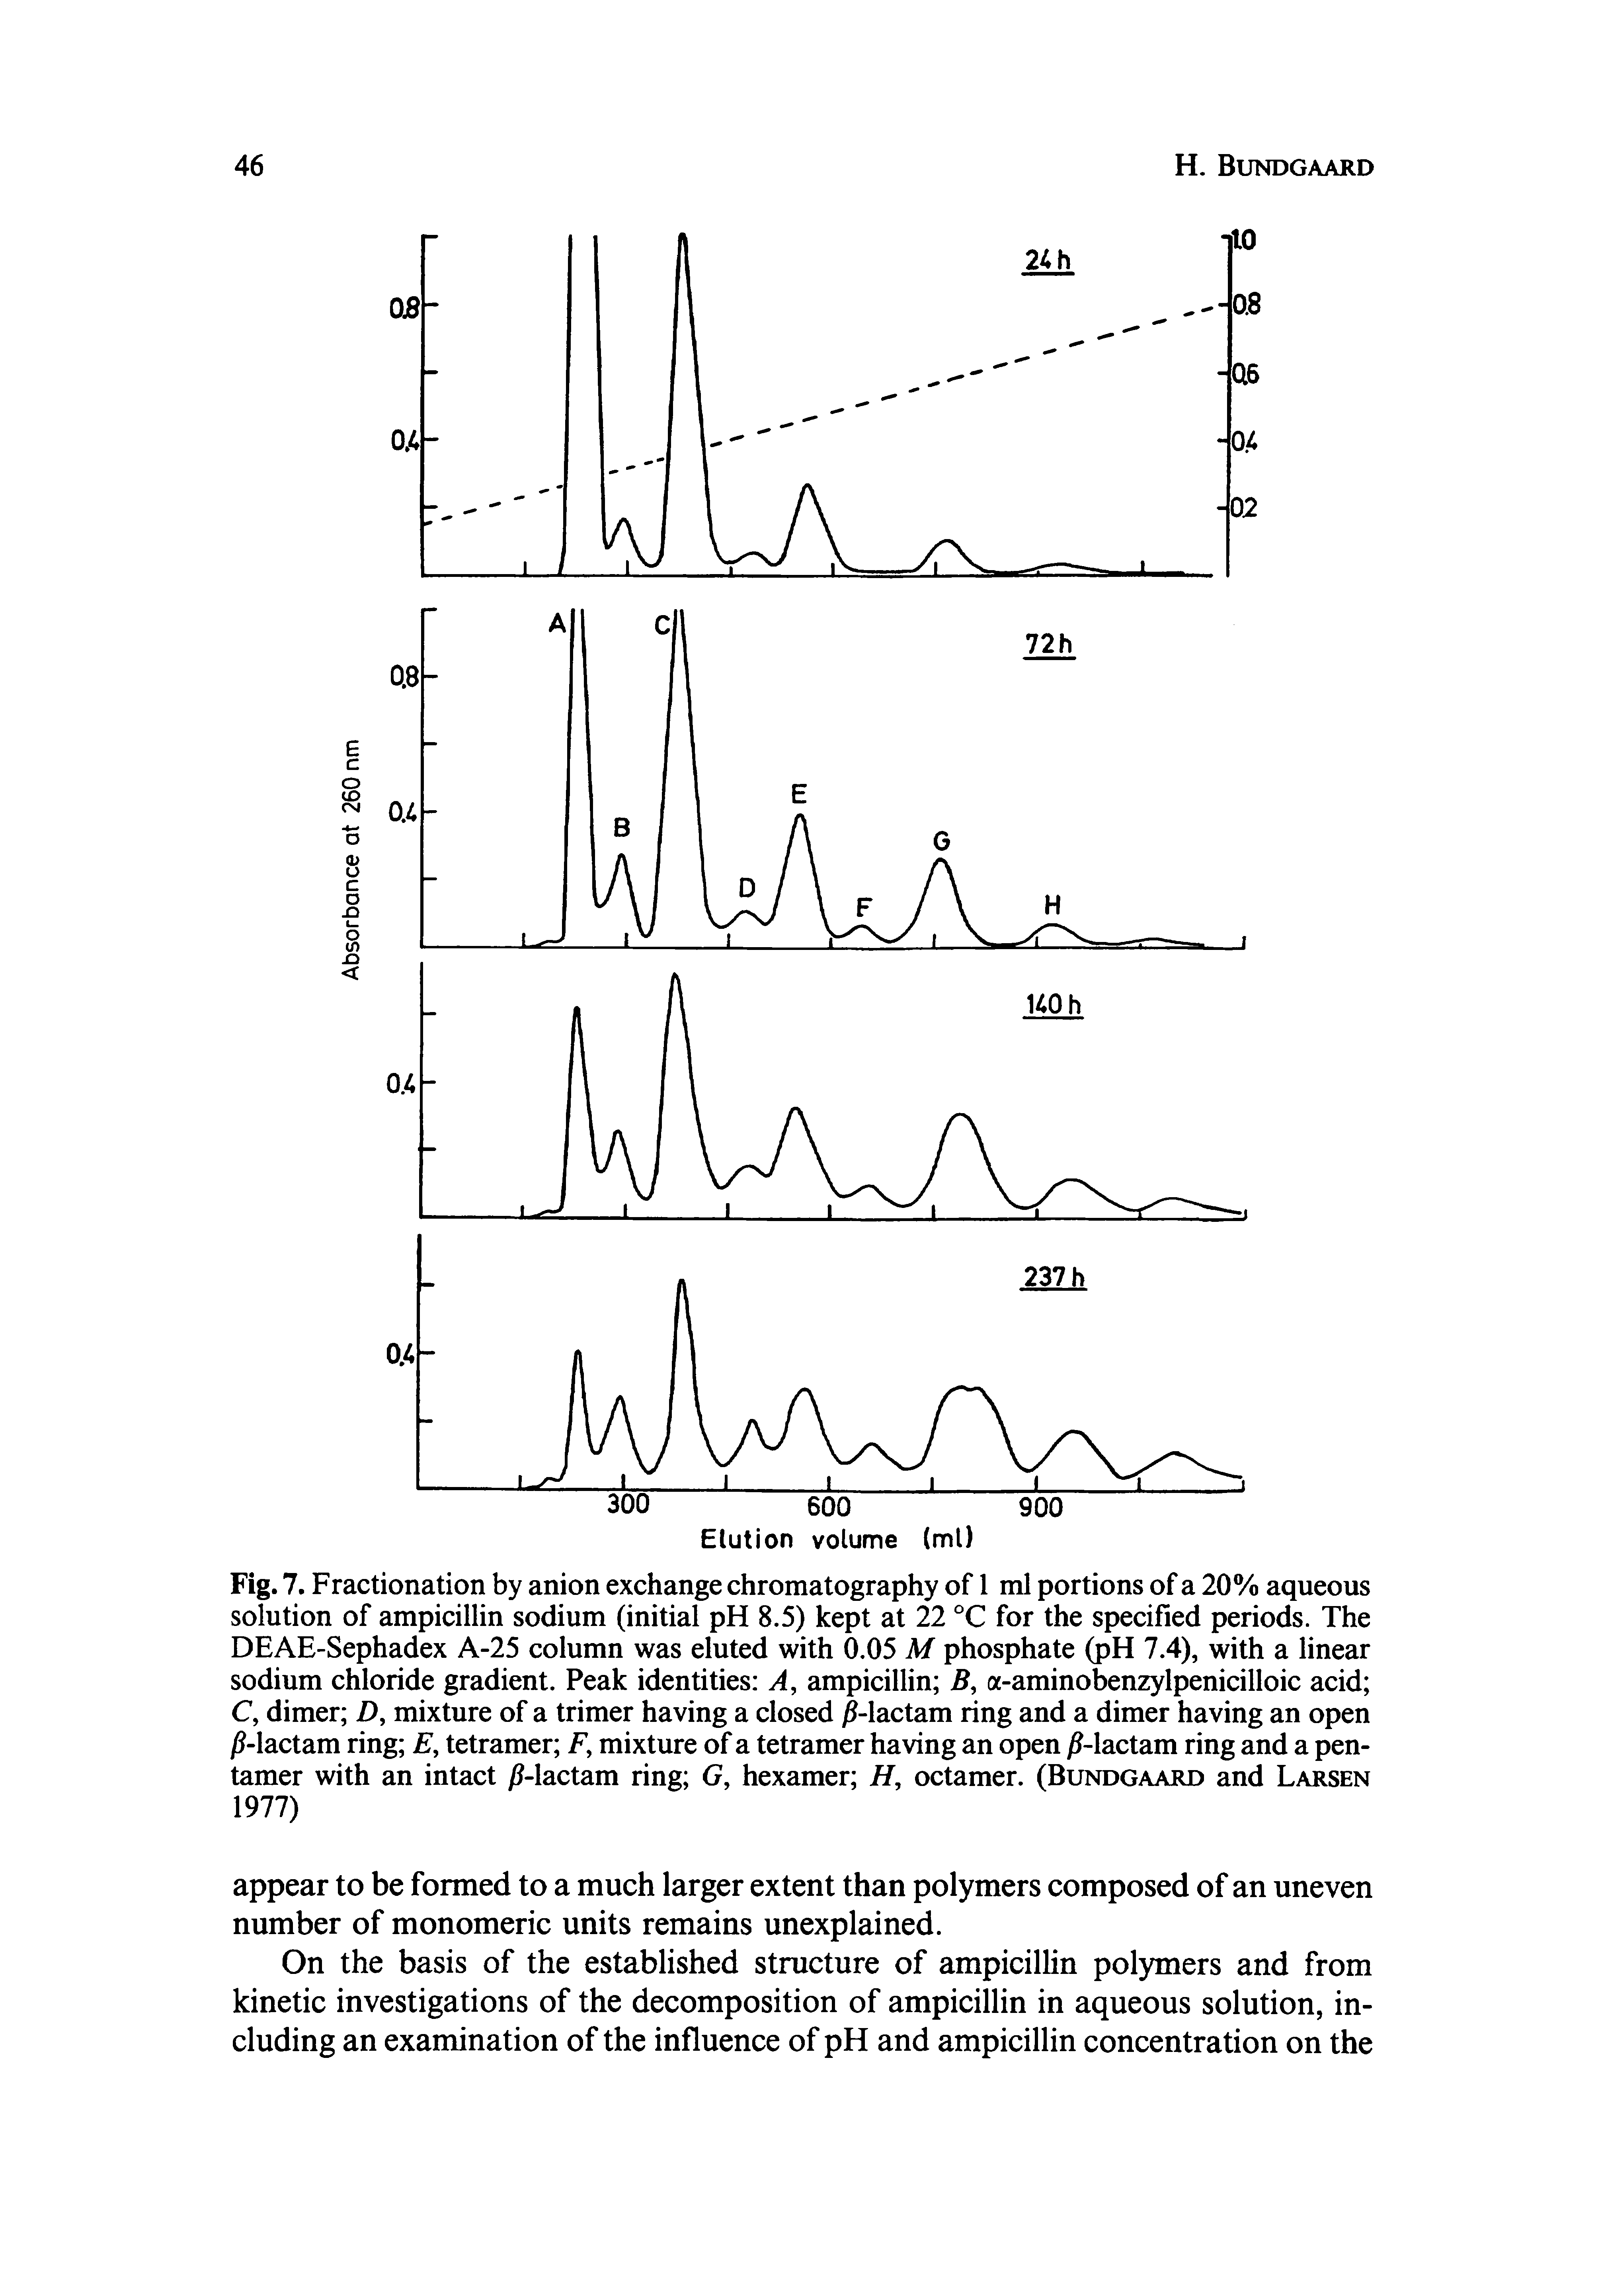 Fig. 7. Fractionation by anion exchange chromatography of 1 ml portions of a 20% aqueous solution of ampicillin sodium (initial pH 8.5) kept at 22 °C for the specified periods. The DEAE-Sephadex A-25 column was eluted with 0.05 M phosphate (pH 7.4), with a linear sodium chloride gradient. Peak identities A, ampicillin B, a-aminobenzylpenicilloic acid C, dimer D, mixture of a trimer having a closed -lactam ring and a dimer having an open j -lactam ring E, tetramer /% mixture of a tetramer having an open j -lactam ring and a pen-tamer with an intact j -lactam ring G, hexamer H, octamer. (Bundgaard and Larsen 1977)...